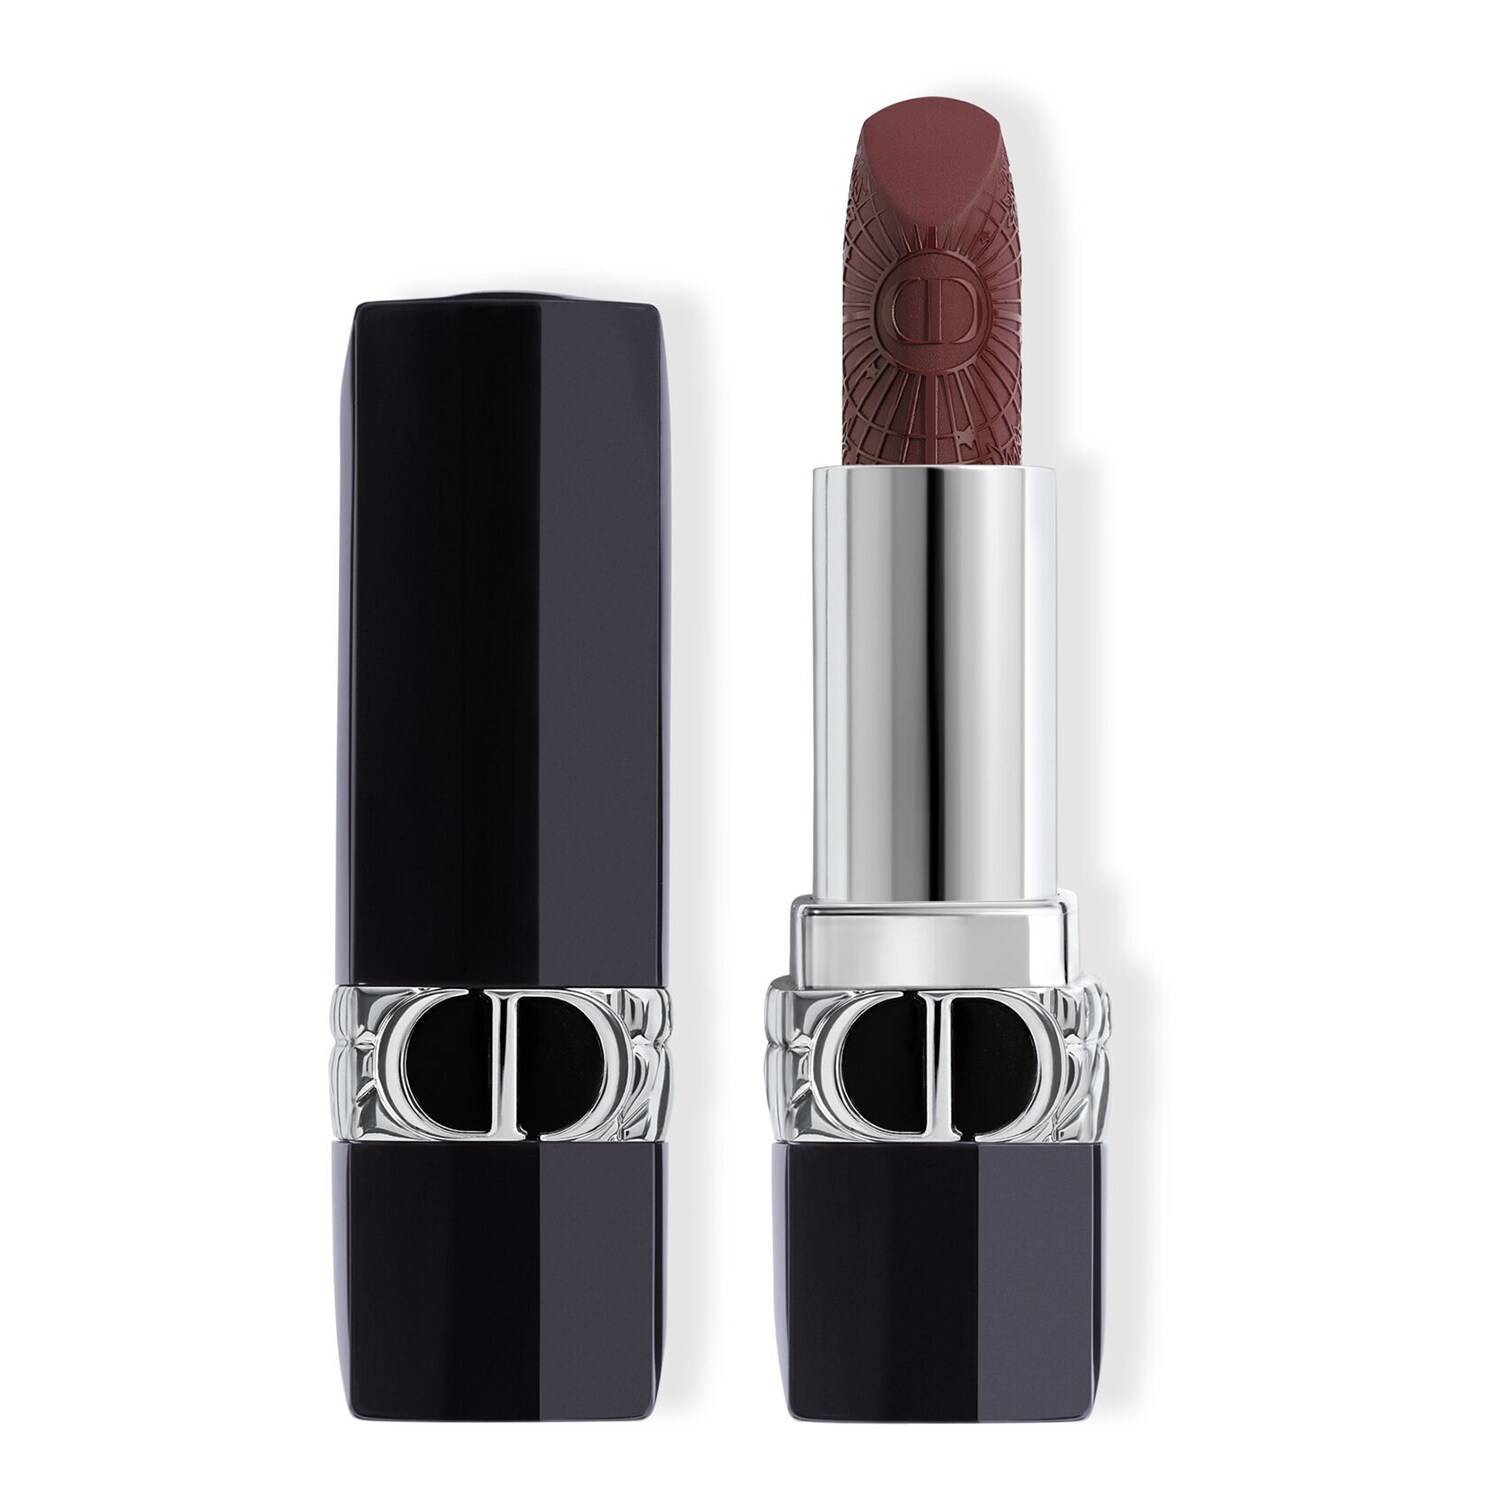 Dior Rouge Dior - Refillable Lipstick - Couture Finish - Limited Edition 913 Mystic Plum - Mat